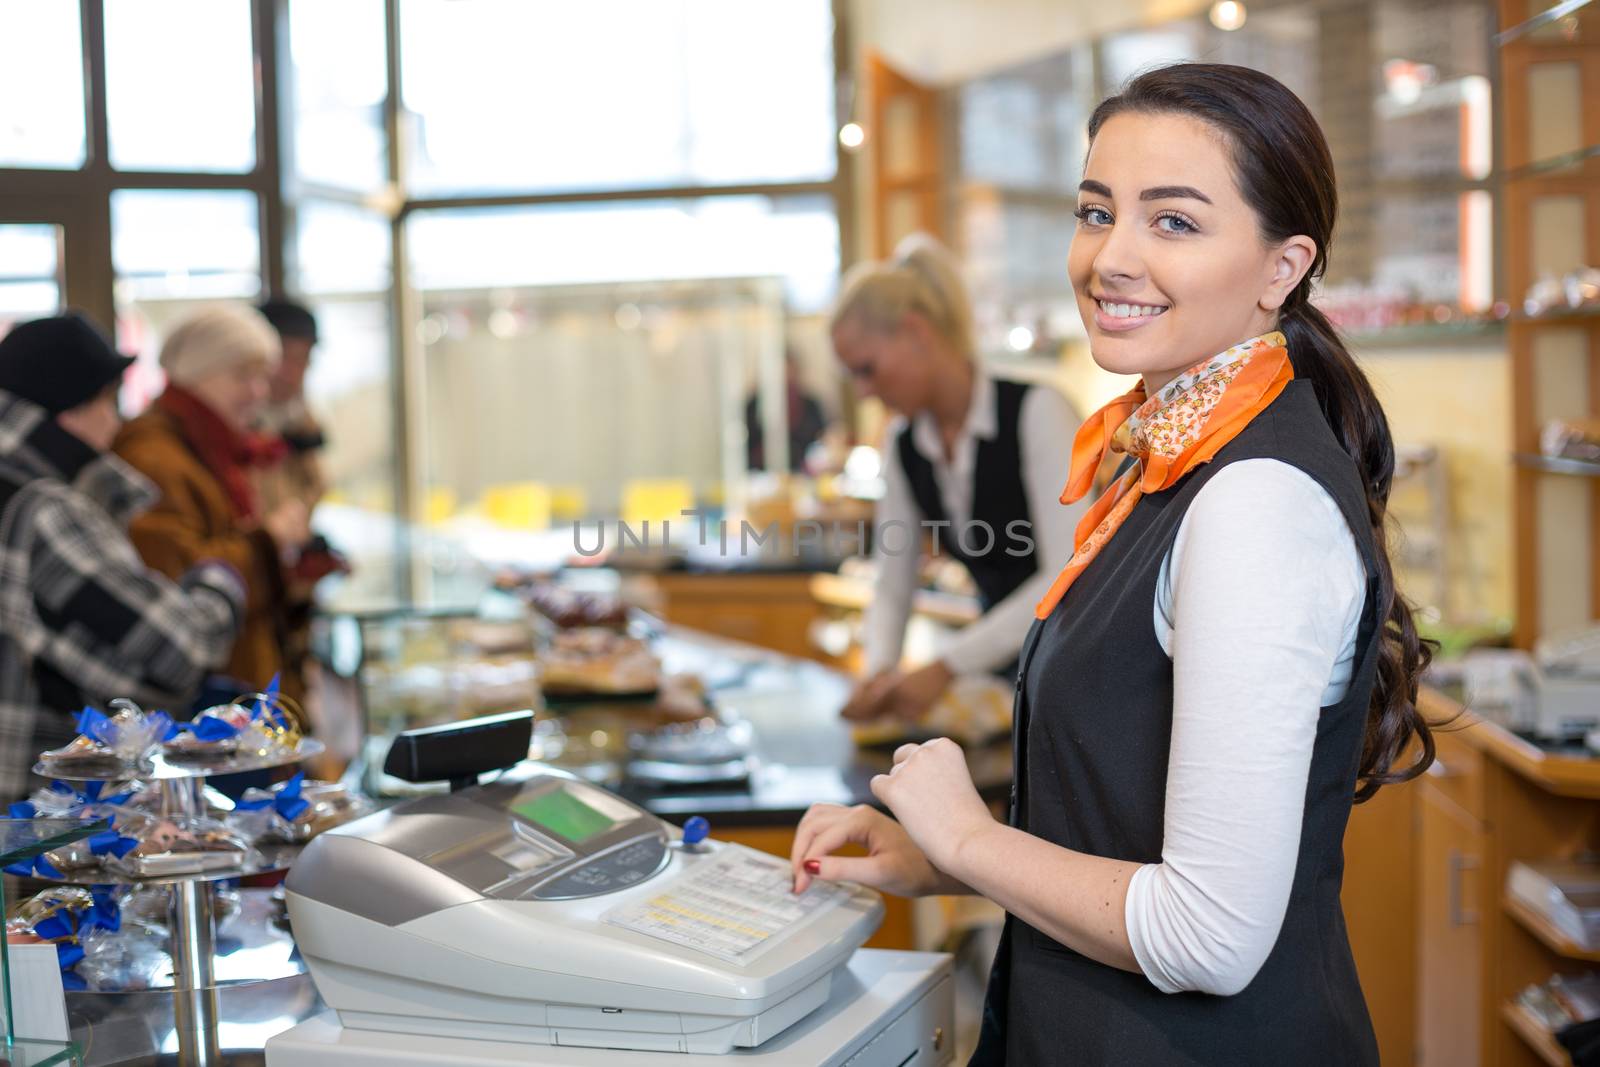 Shopkeeper and saleswoman at cash register or checkout counter